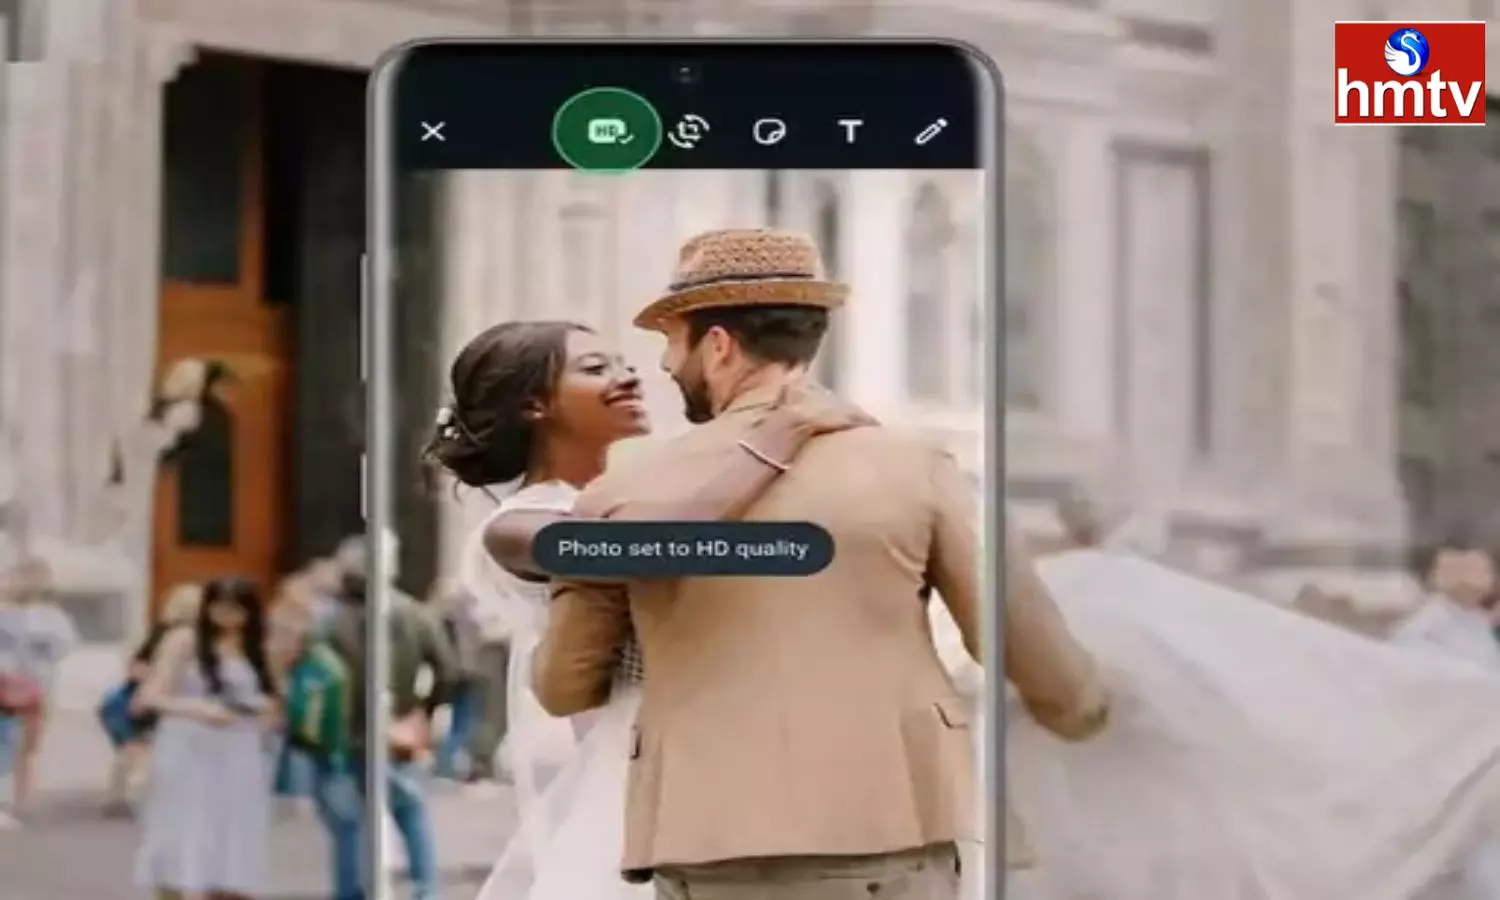 Instant Messaging App WhatsApp Has Rolled Out HD Image Sharing Feature Up To 4160x2080 Pixel Resolution